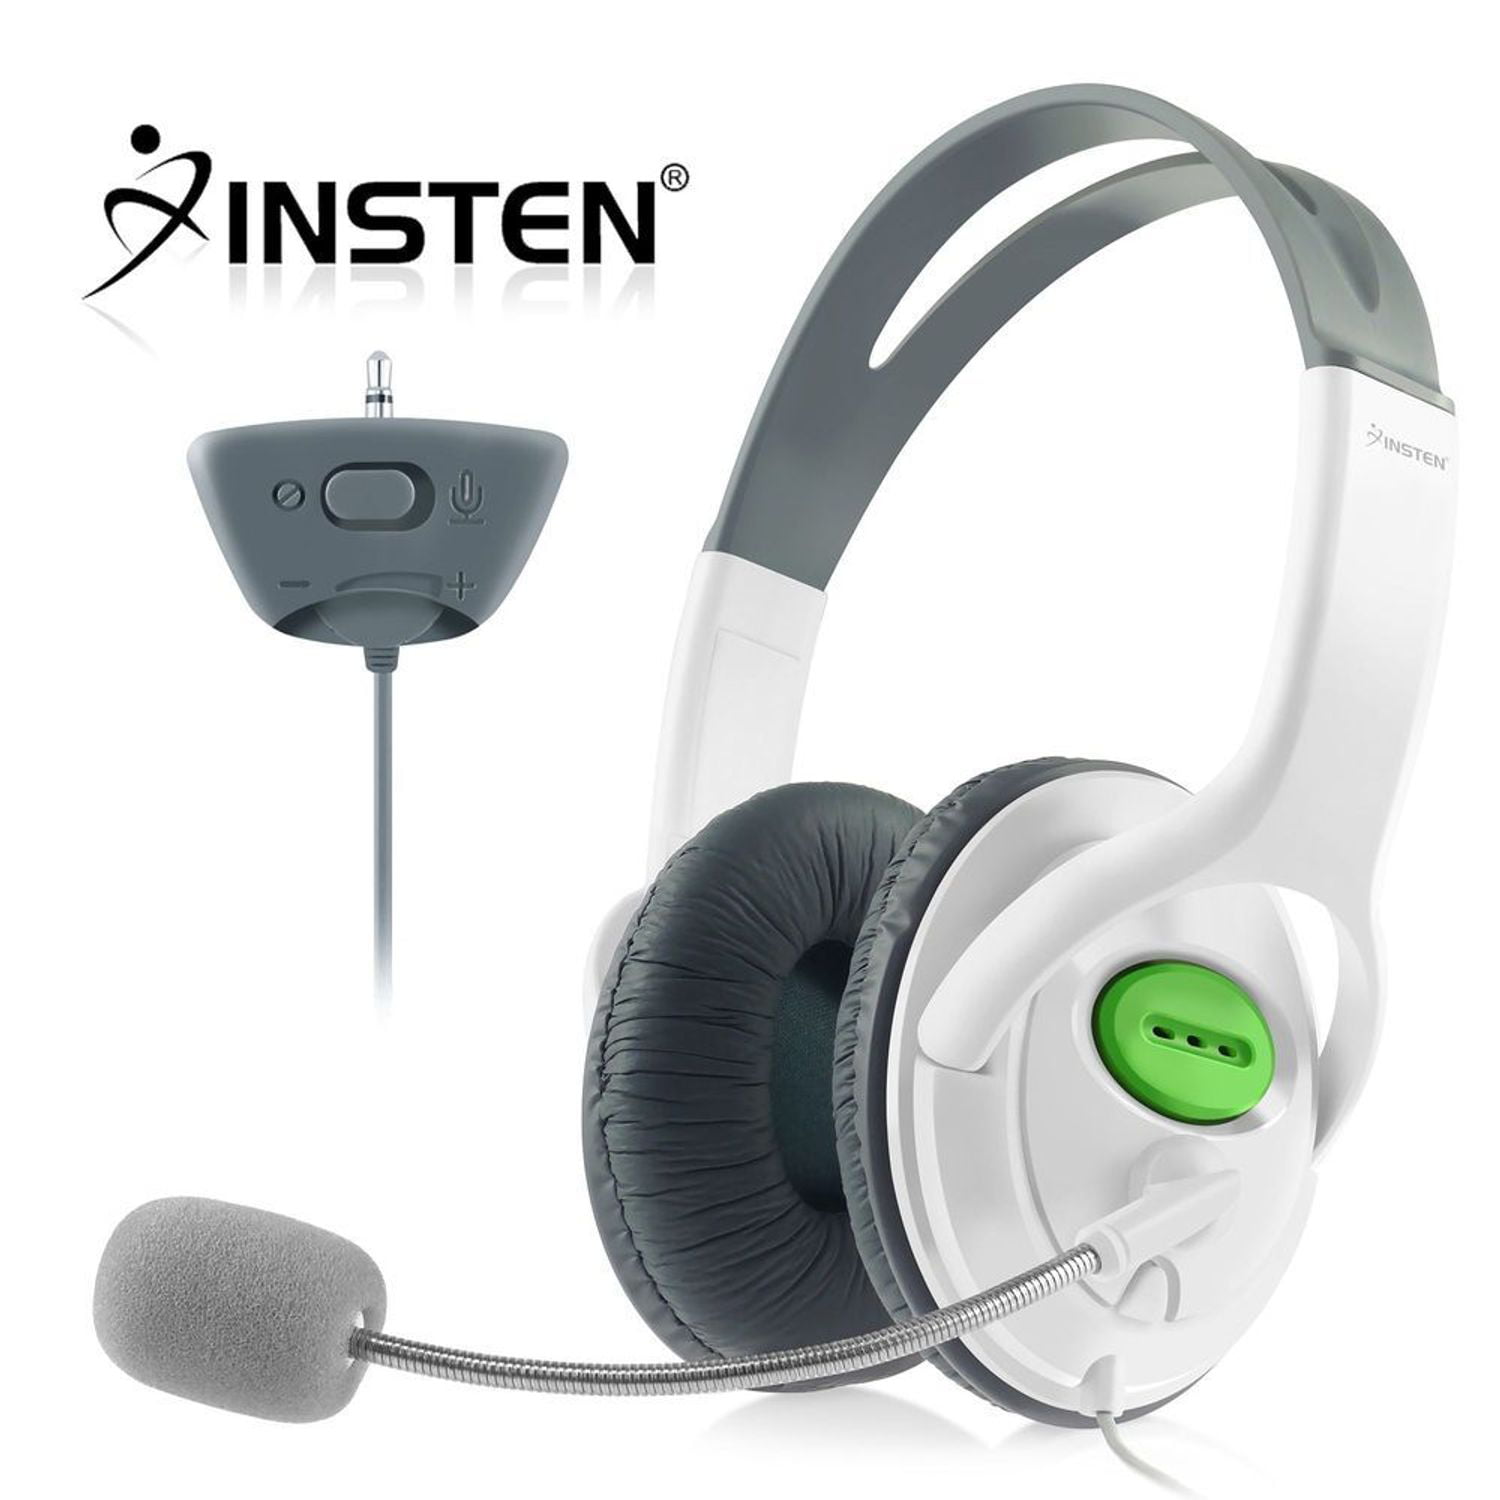 Insten Gaming Headset with Mic for Microsoft Xbox 360 / Xbox 360 Slim (Live Chat Microphone Headphone)